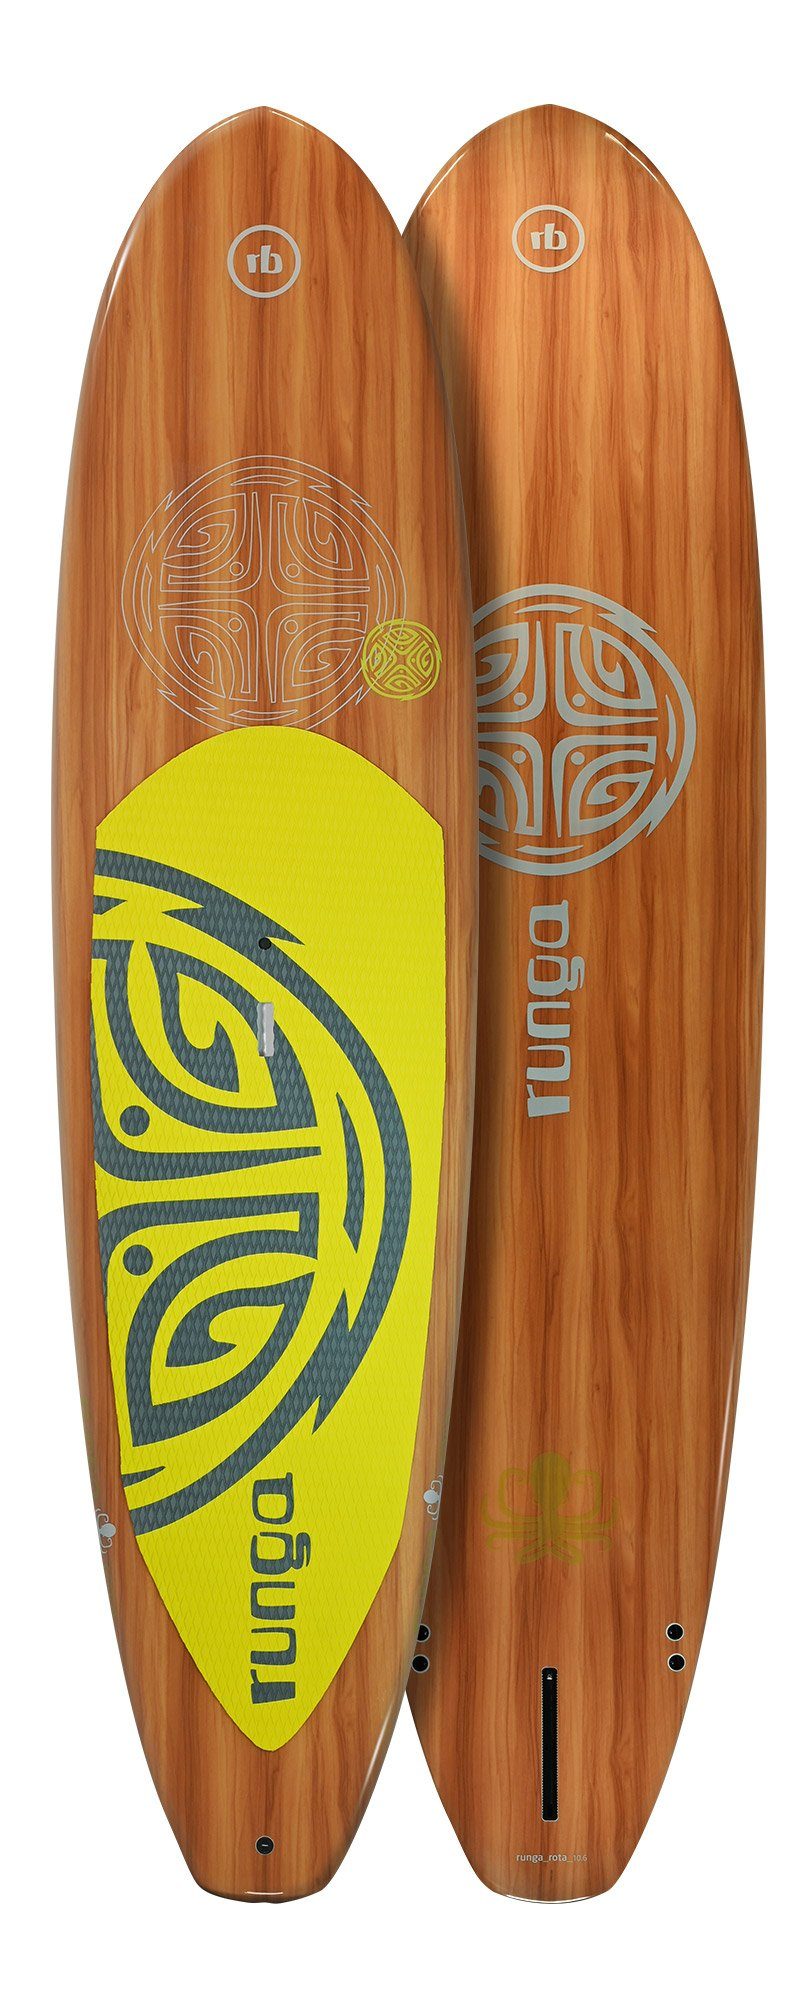 coiled YELLOW Runga-Boards Up Stand SUP, Paddling Board & Finnen-Set) (Set leash ROTA Allrounder, SUP-Board 10.6, Hard 3-tlg. Inkl.